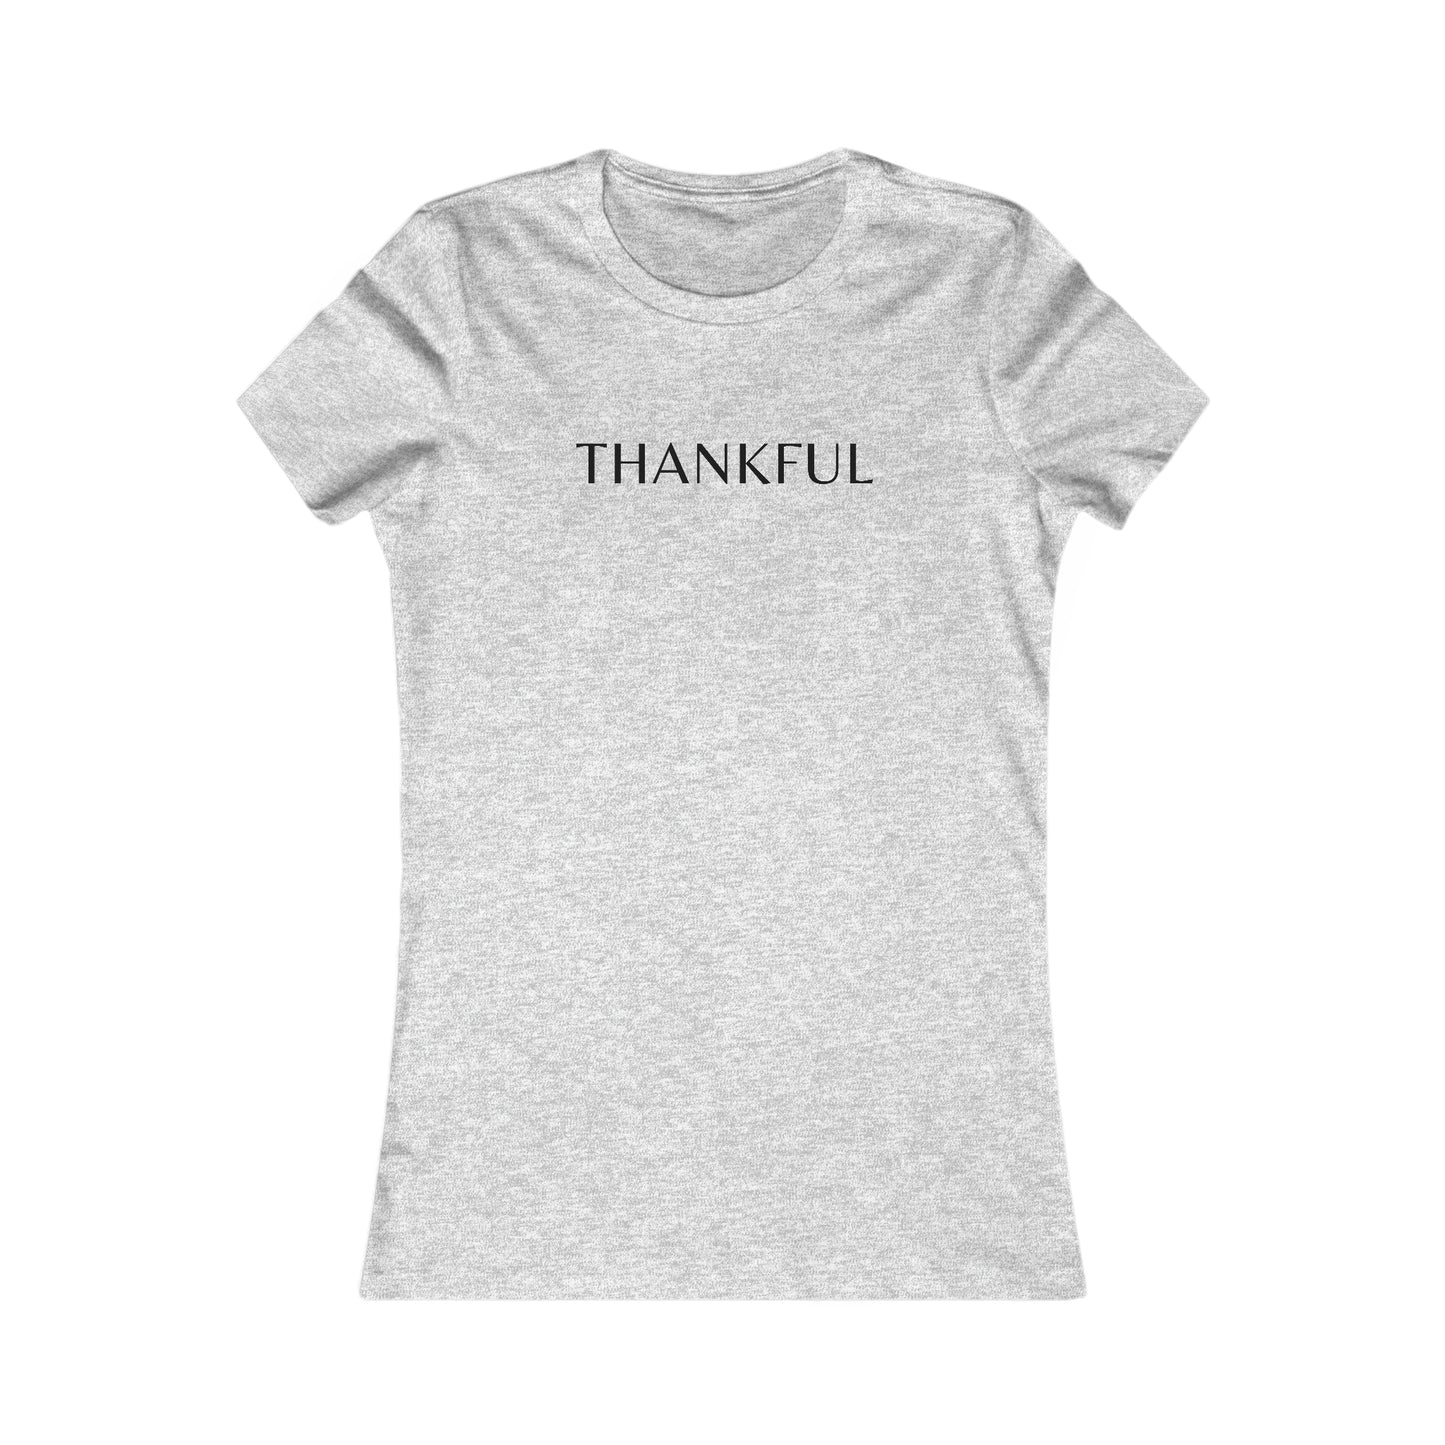 Thankful Fitted Tee